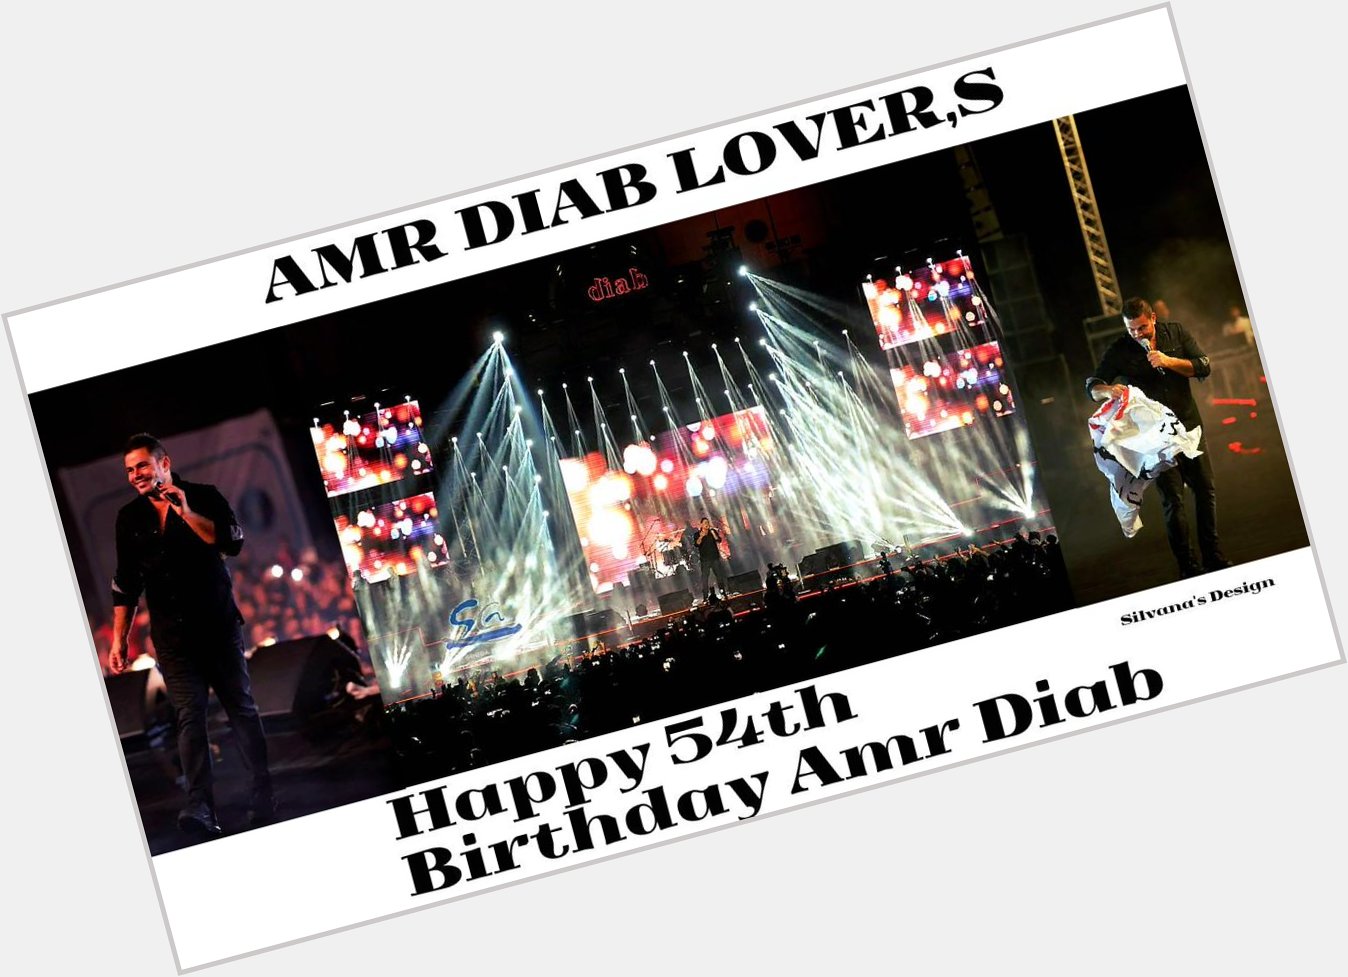 HAPPY BIRTHDAY AMR DIAB FROM AMR DIAB LOVER,S AT FACEBOOK AND YOUR BEST DIABIAN HAPPY 54TH BIRTHDAY 